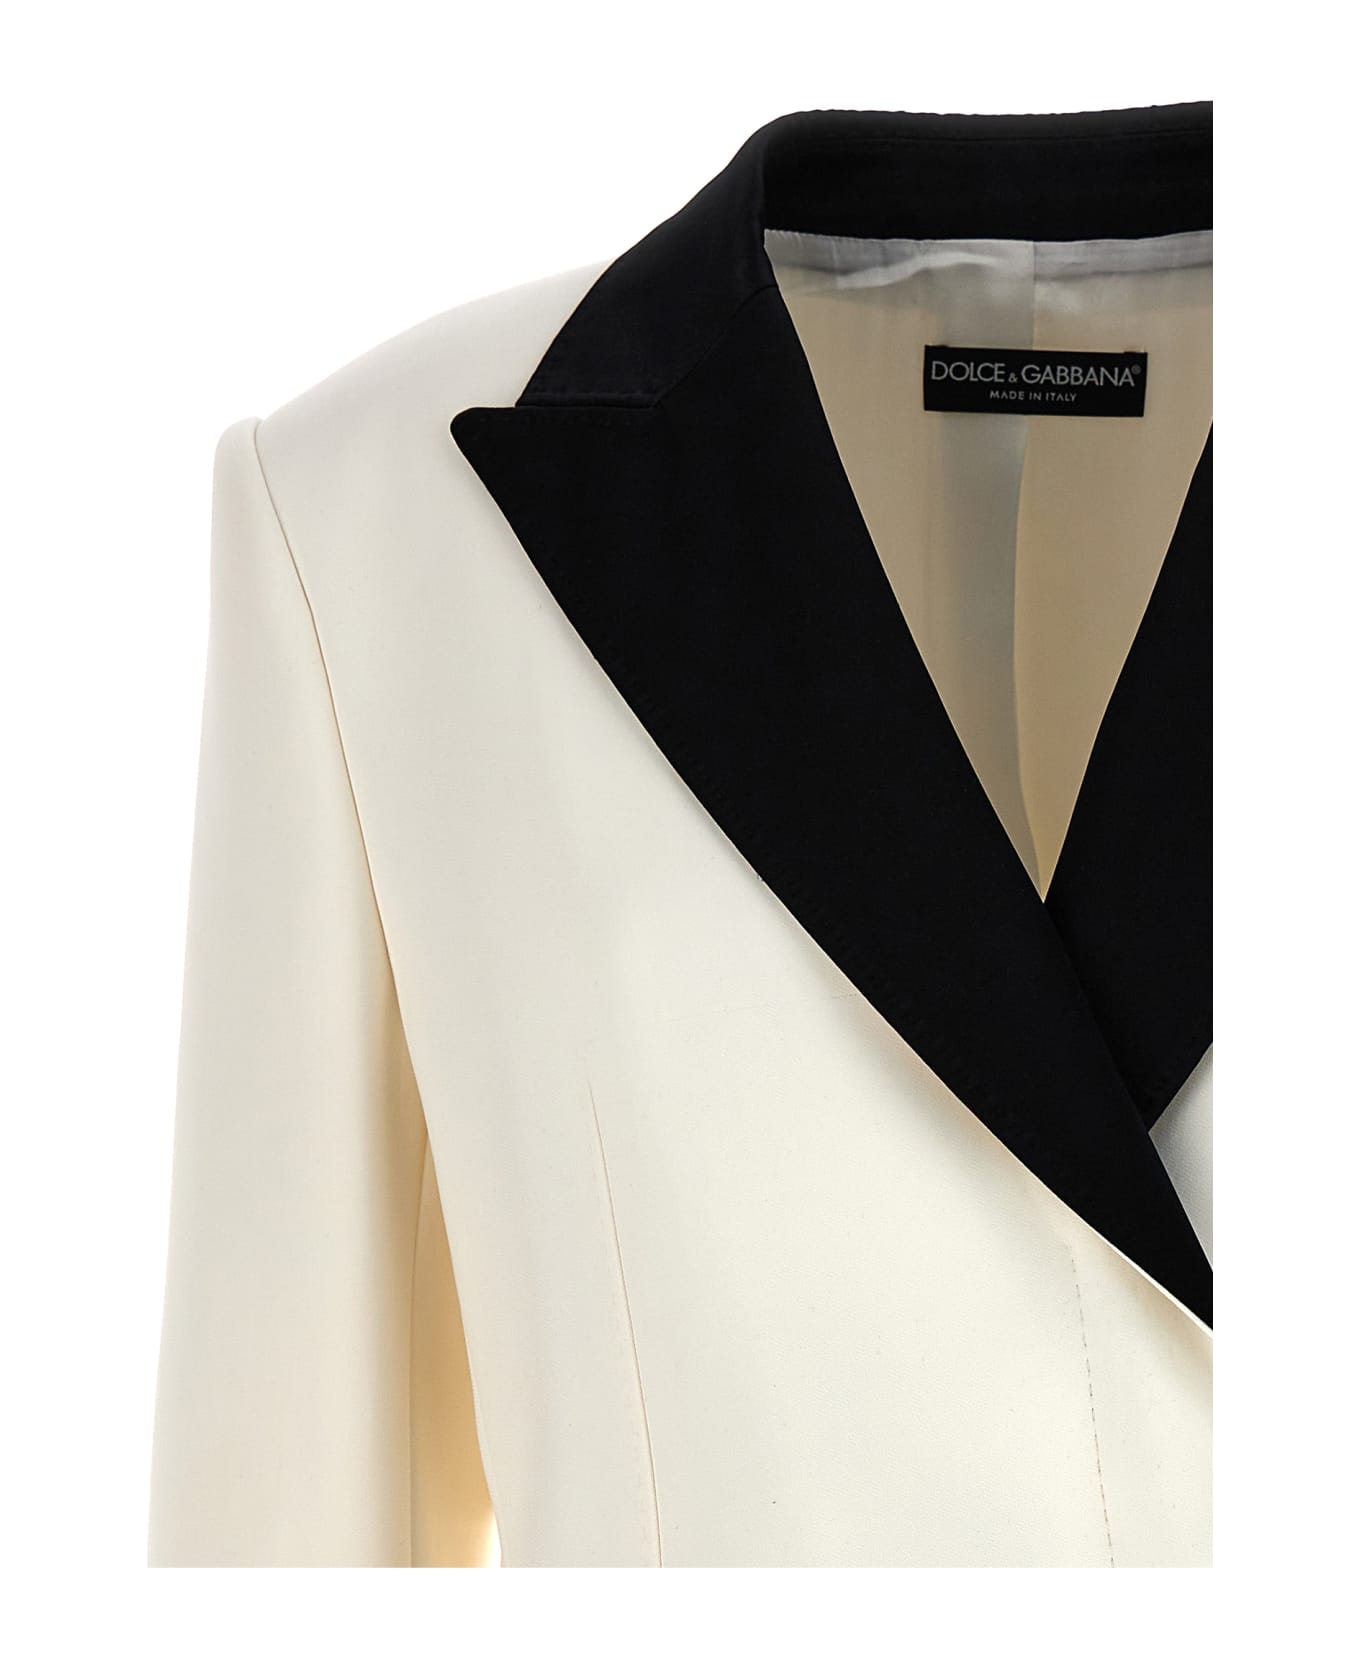 Dolce & Gabbana Double-breasted Jacket With Peak Revers - White/Black